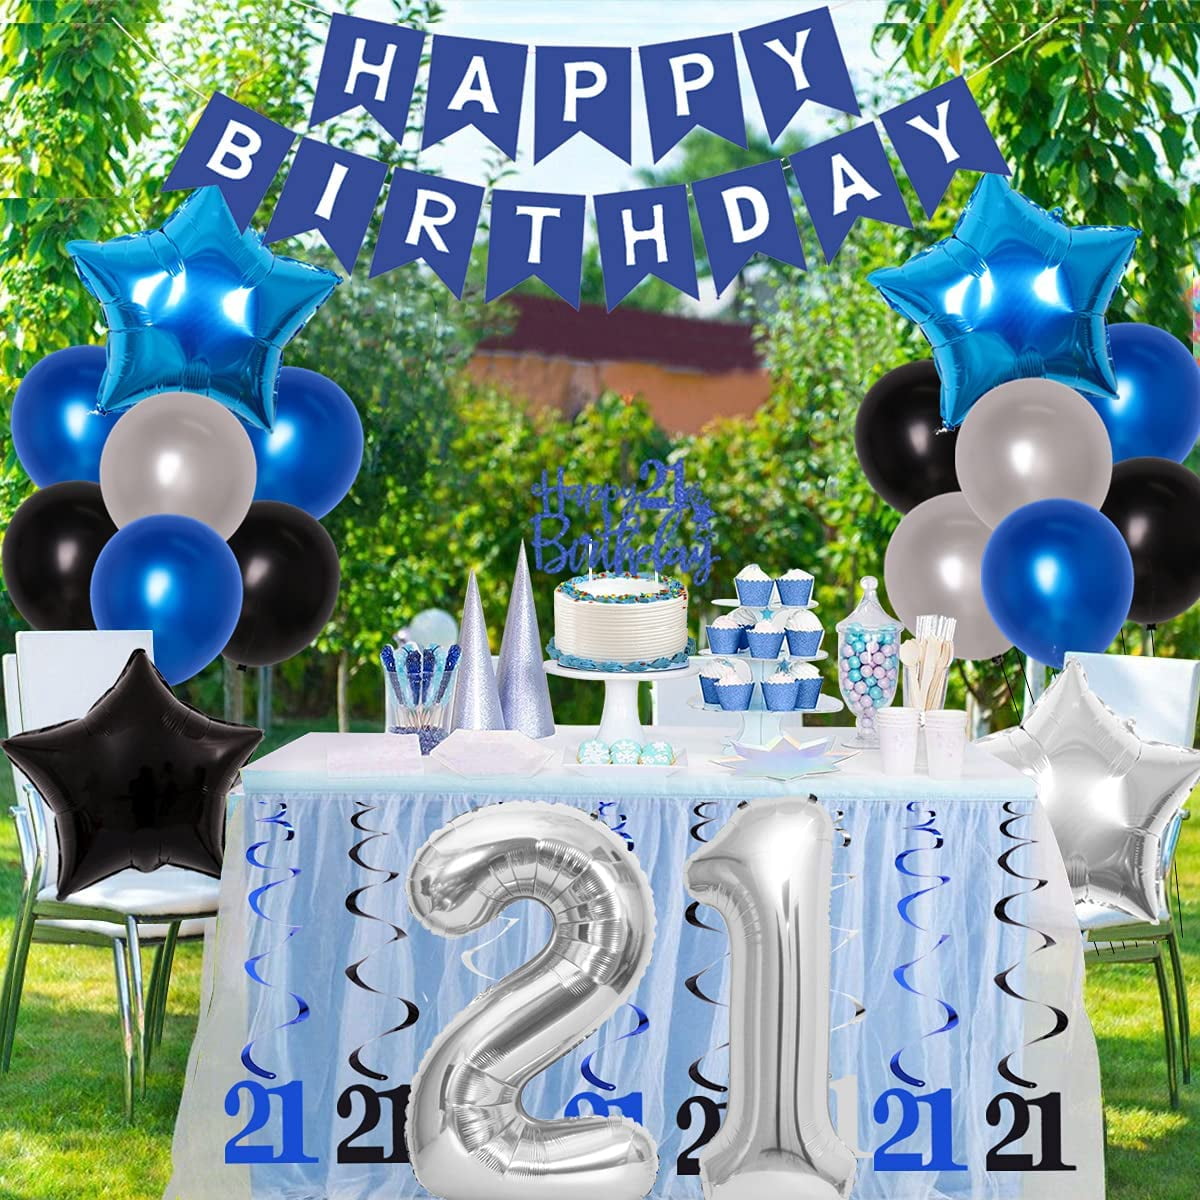 Blue and Silver 21st Birthday Decorations for Boy Men and Women 21st Birthday Party Supplies Pack 21 and Happy Birthday Balloons Banner Hanging Swirls Cake Topper - Walmart.com